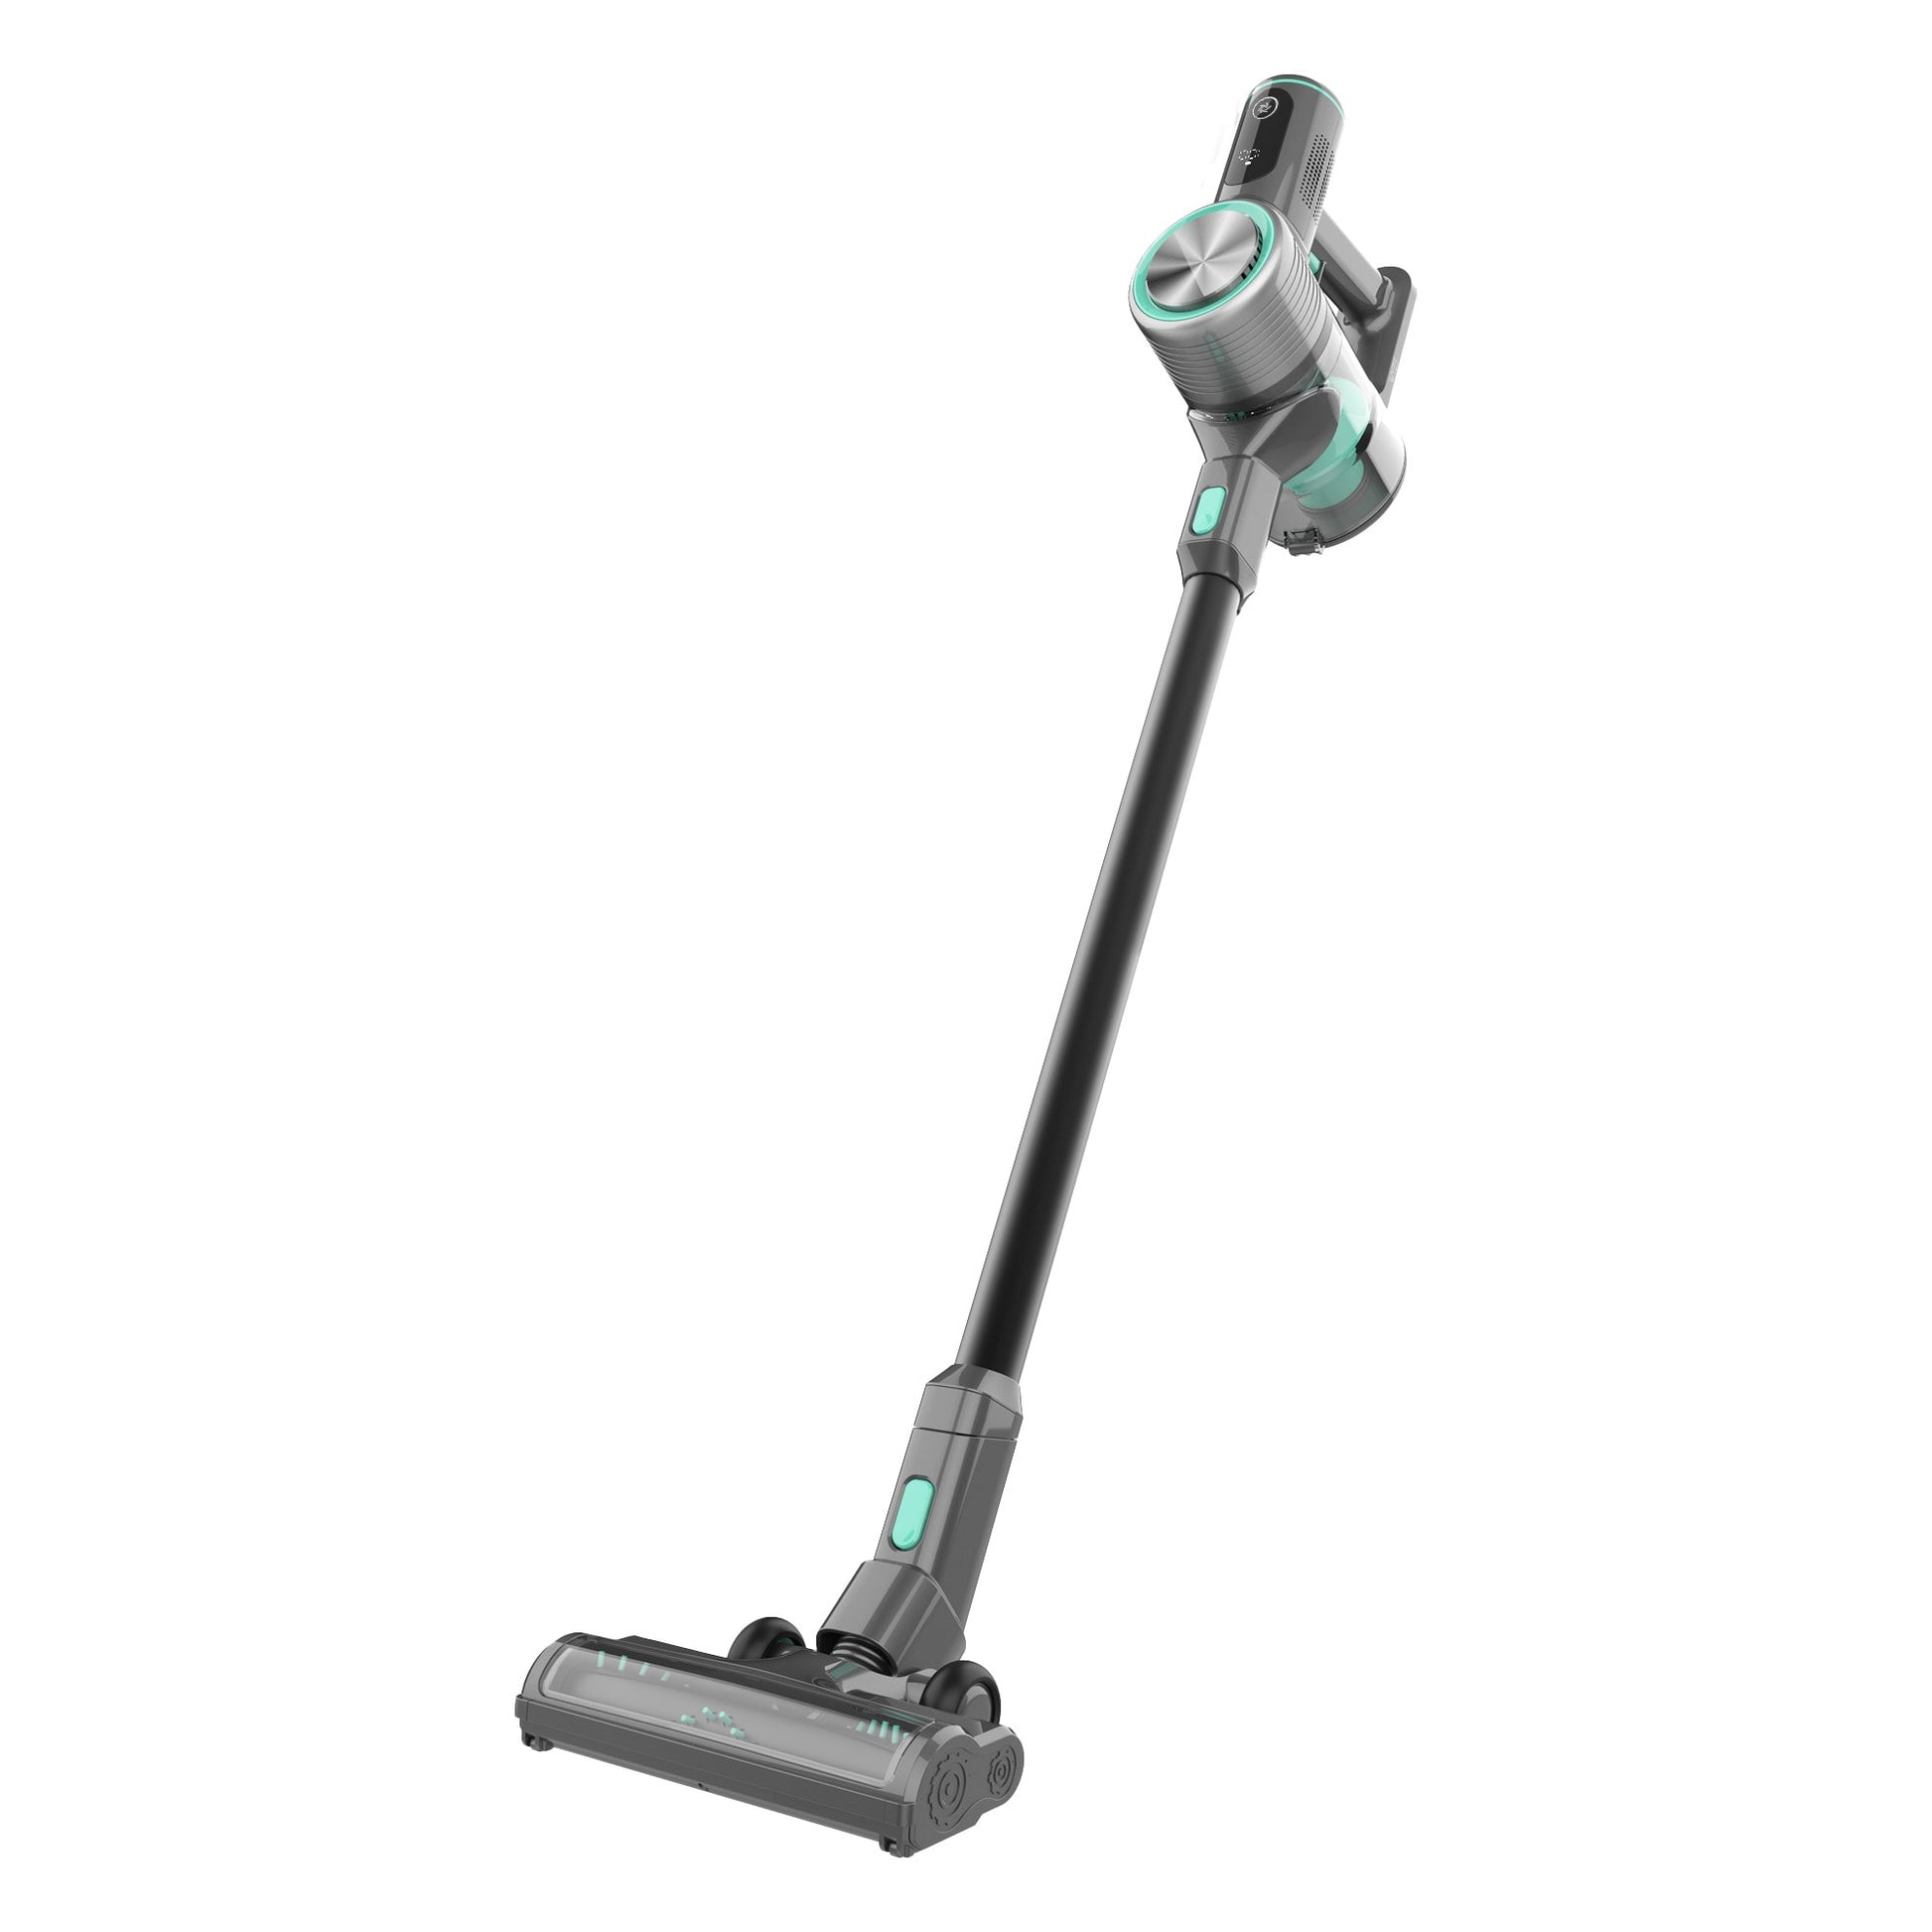 This Cordless Vacuum Is a Must-Have for Parents and Pet Owners